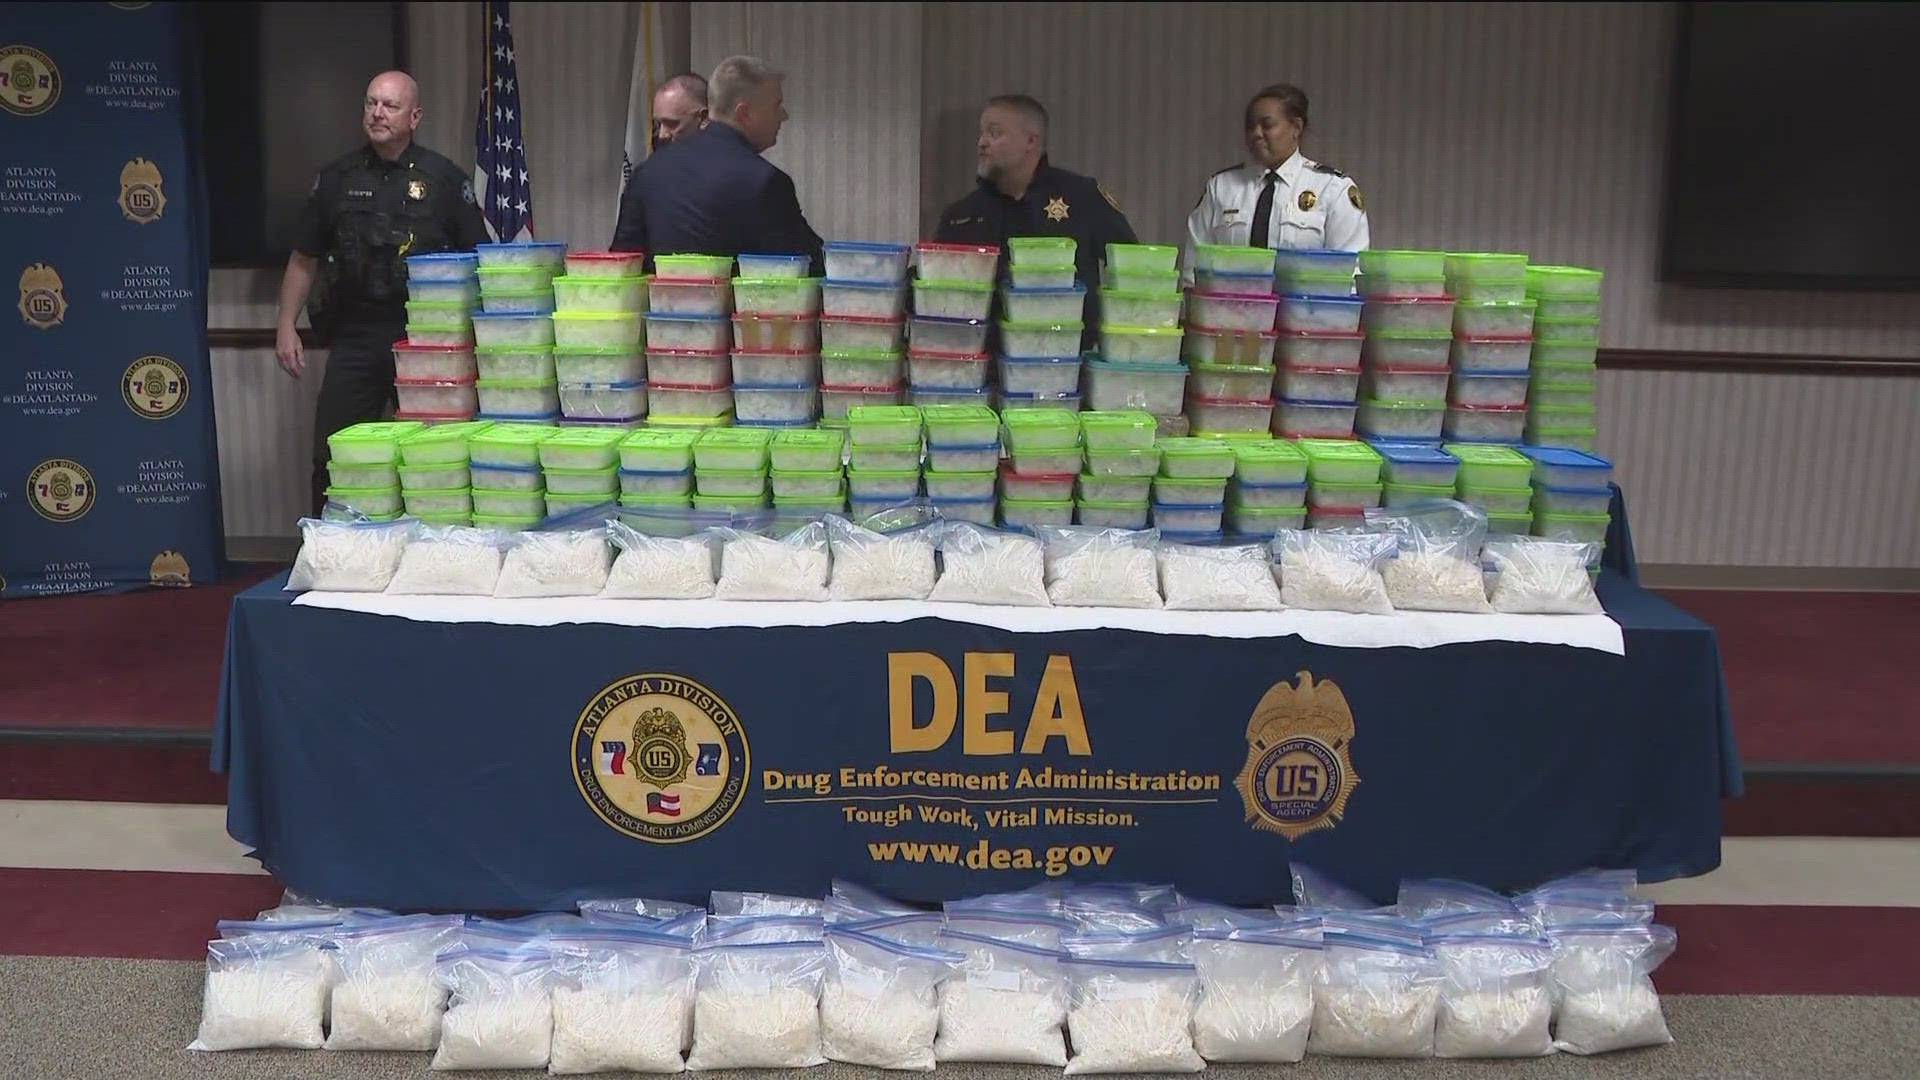 The Drug Enforcement Agency said they found over 350 kilograms of meth inside a storage unit in Norcross on Monday.